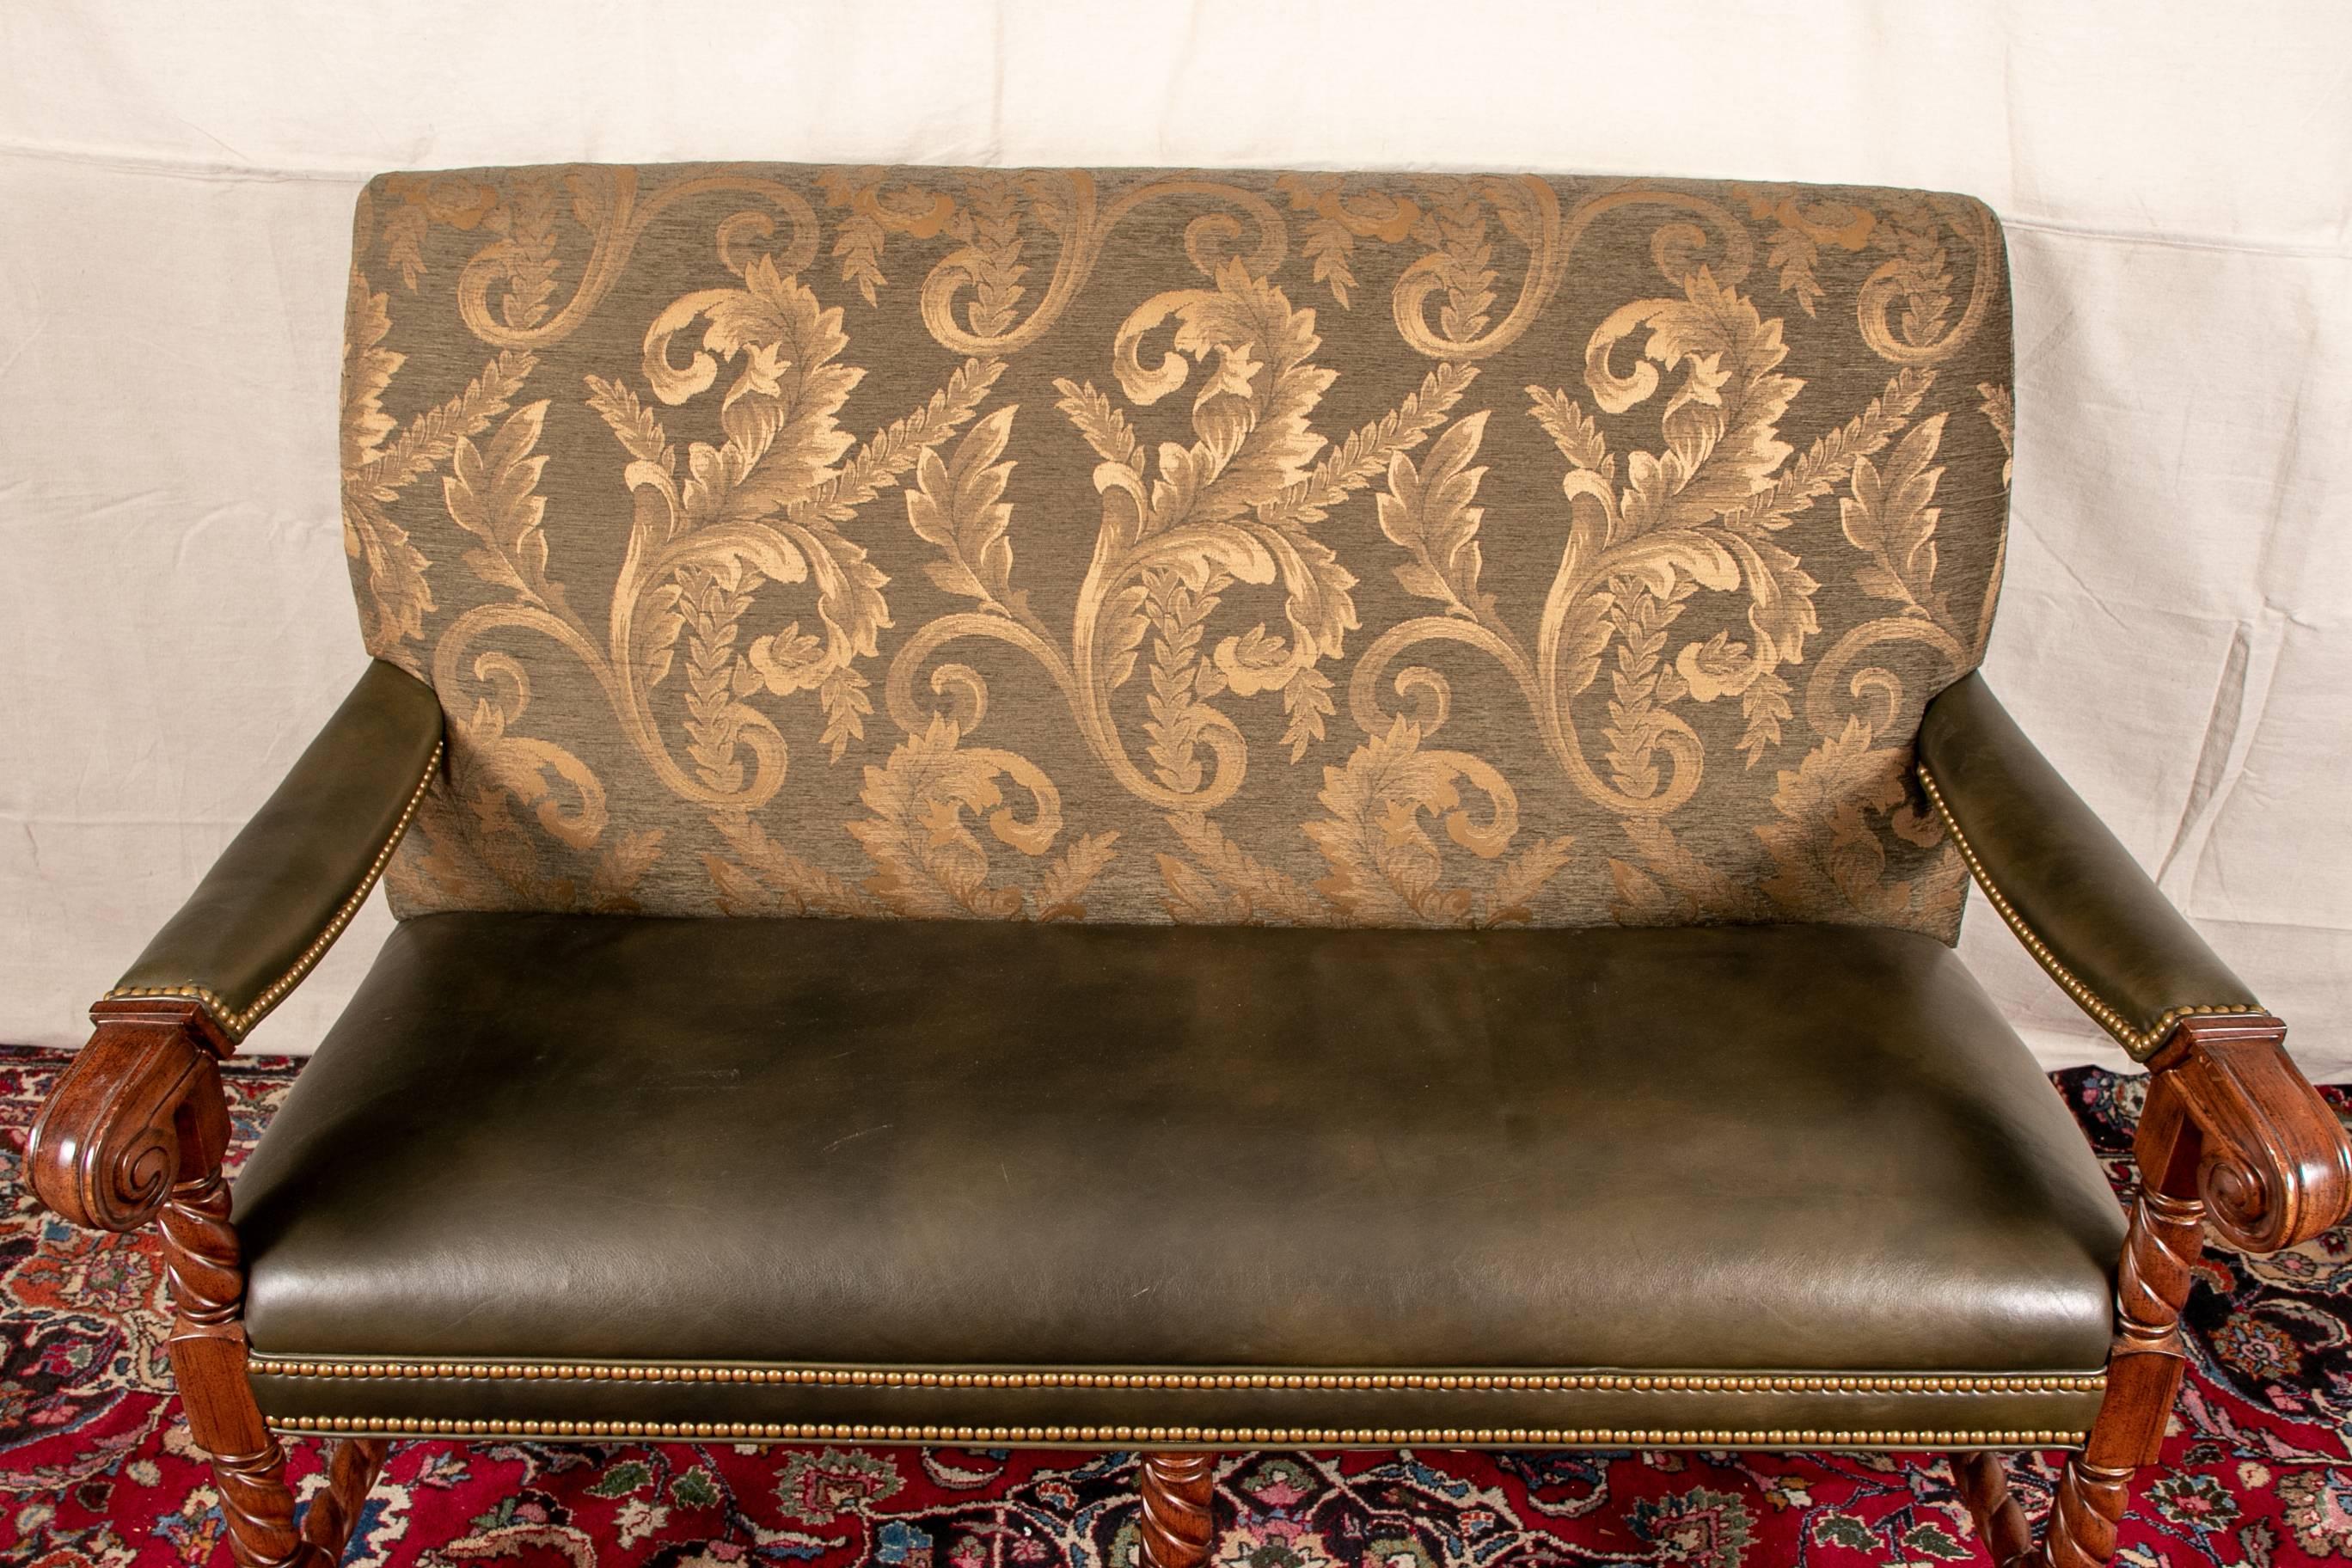 Leather and fabric settee made by Hancock and Moore with olive green leather seat and manchettes, back with olive green and gold fabric, carved armrests continuing down to legs, barley twist stretcher all around

Condition: Expected wear and signs